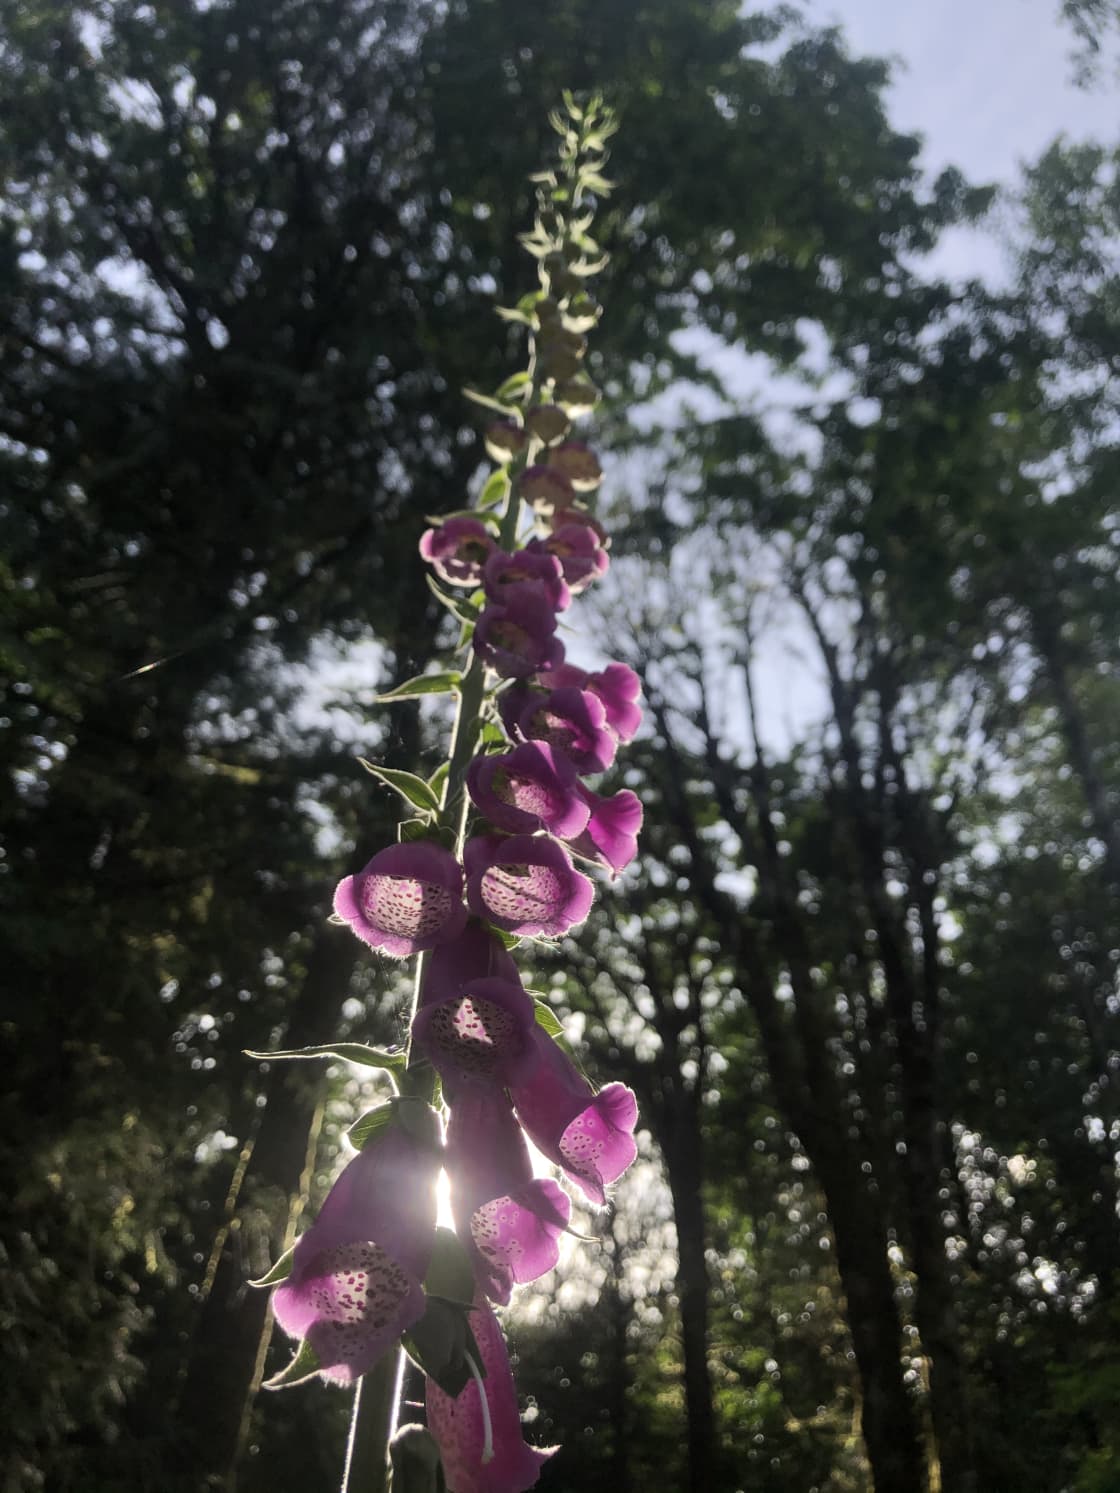 FoxGlove in Bloom! Beautiful and Dangerous (very poisonous to eat, but you may touch it!)